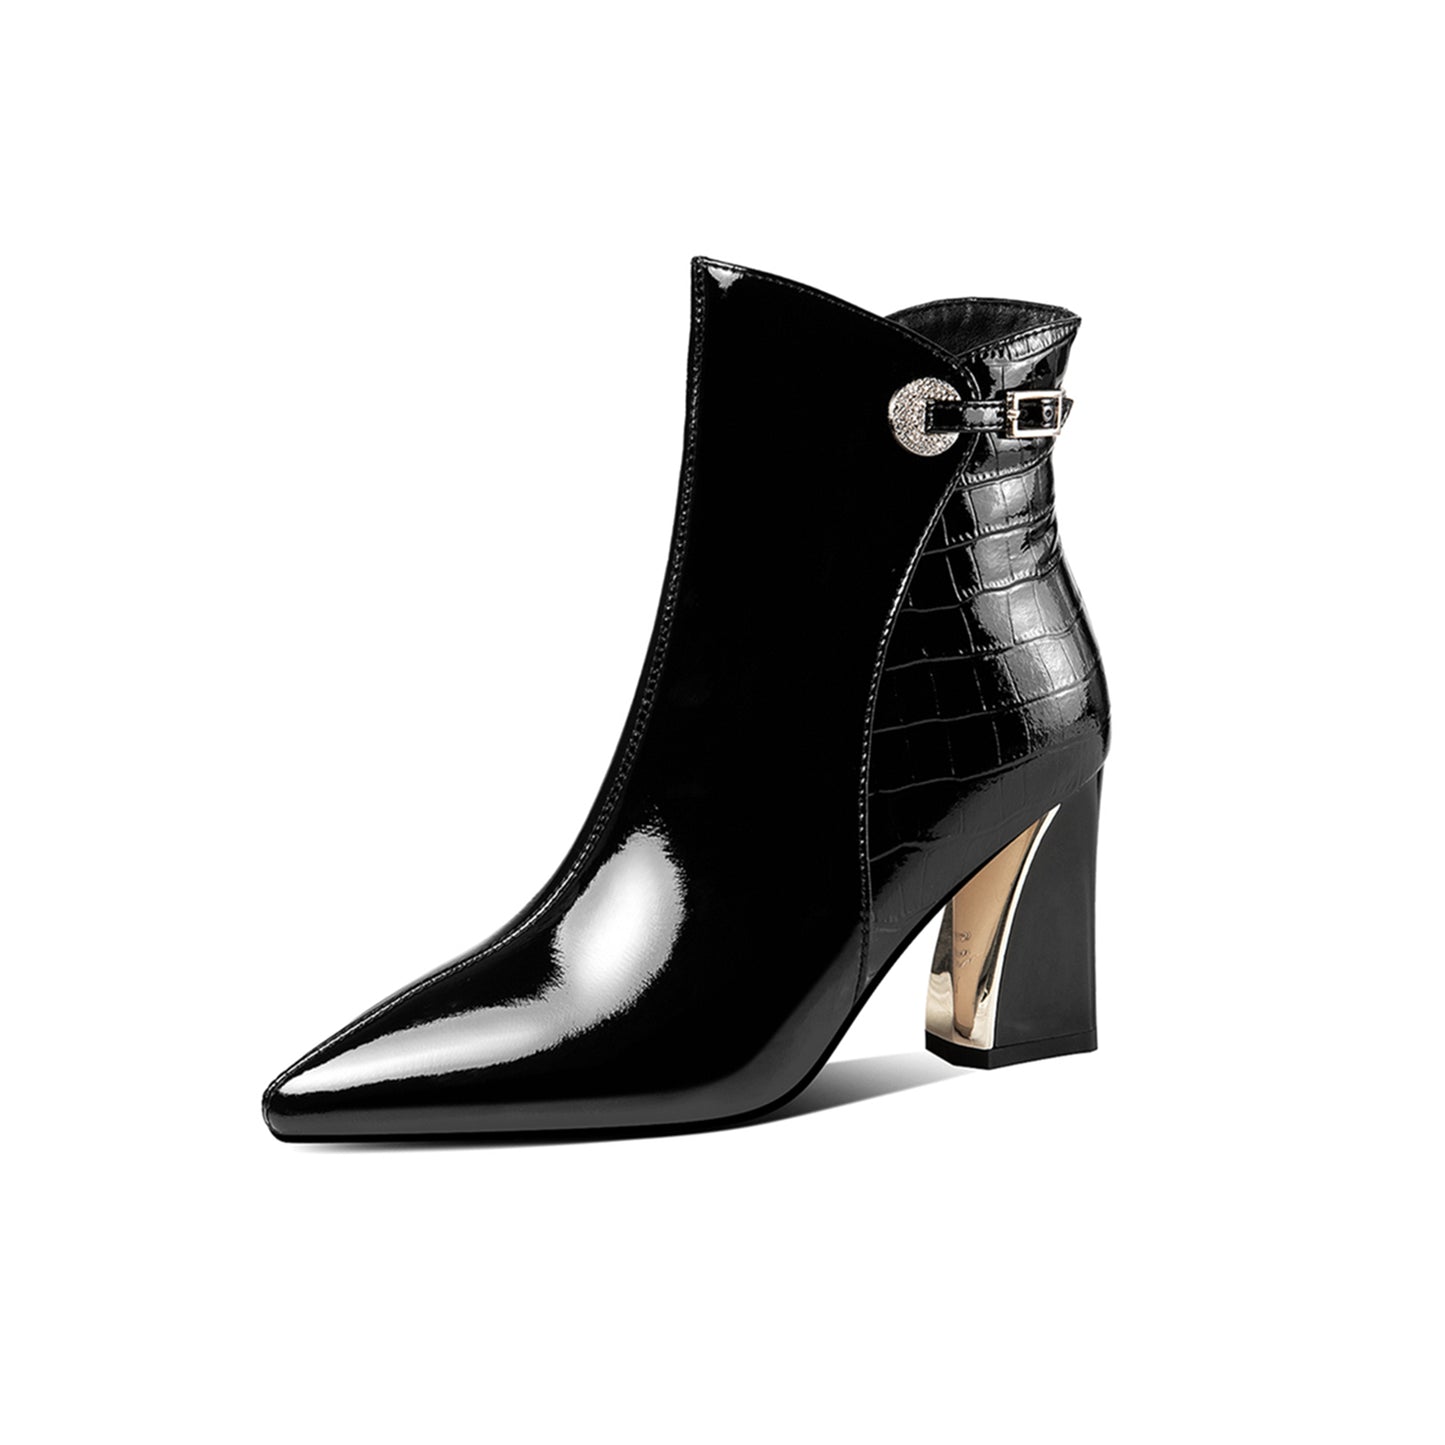 TinaCus Glossy Patent Leather Women's Handmade Chunky Heel Pointed Toe Side zip Up Ankle Booties with Exquisite Buckle Decor